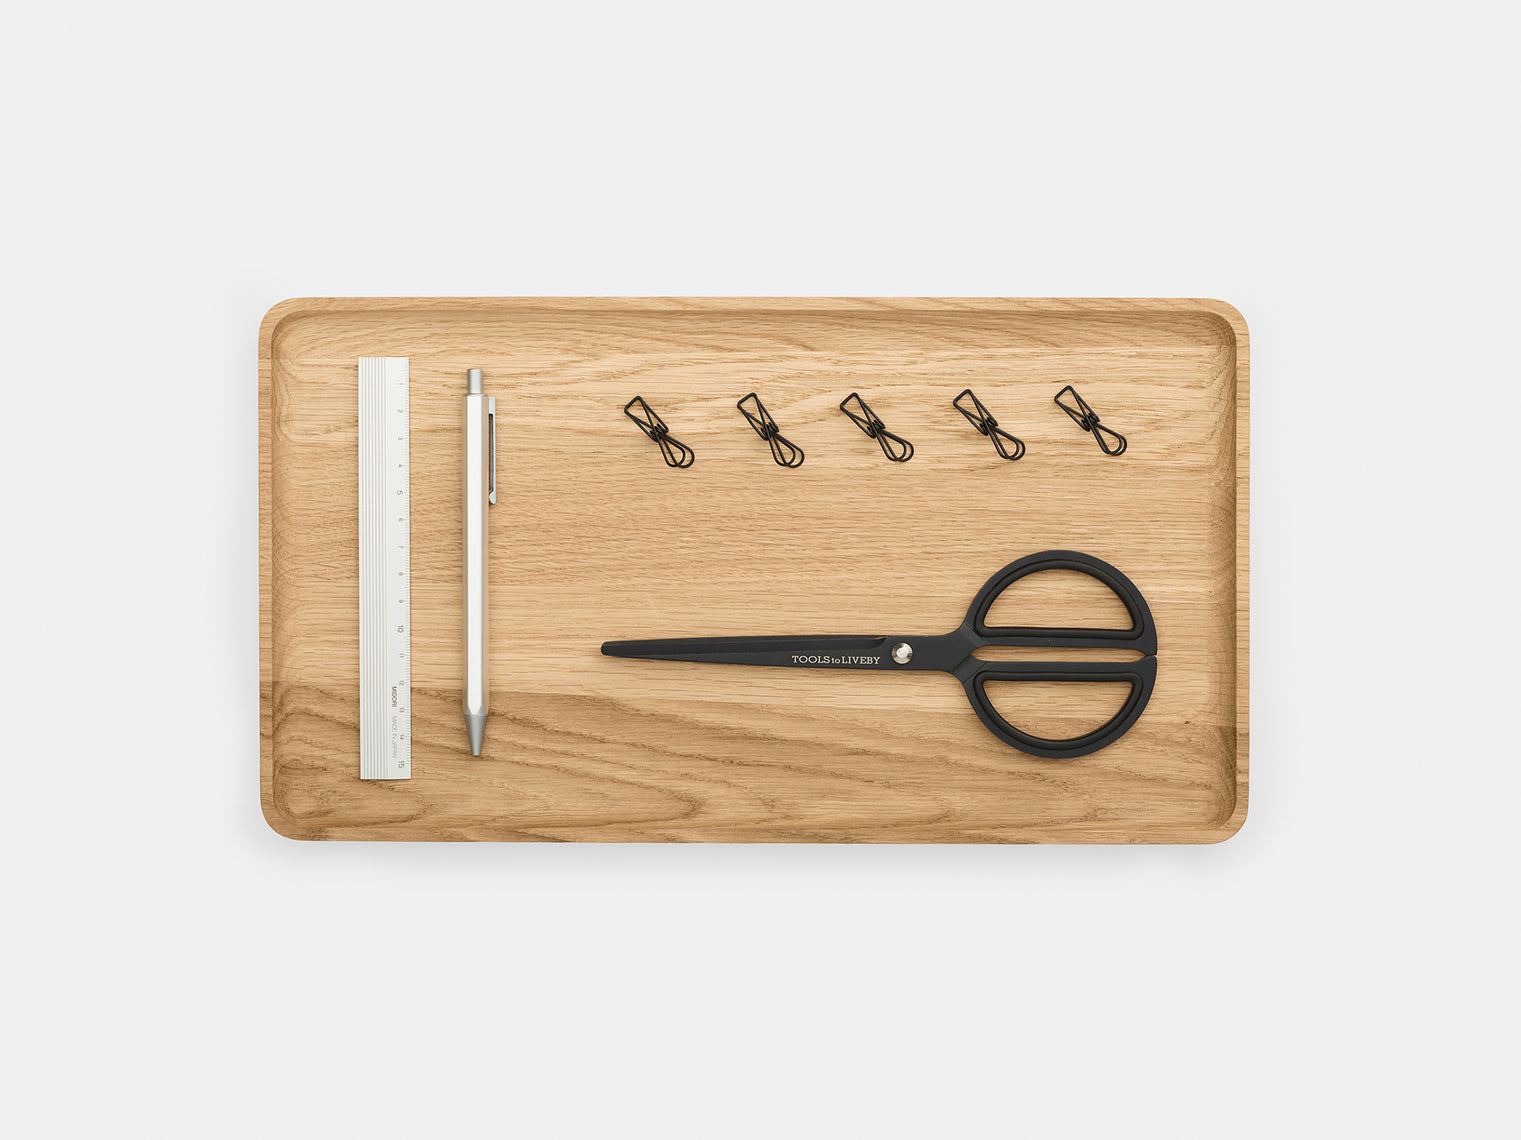 Desk accessories for men iPad & iPhone stand Wood catchall tray Key, pencil